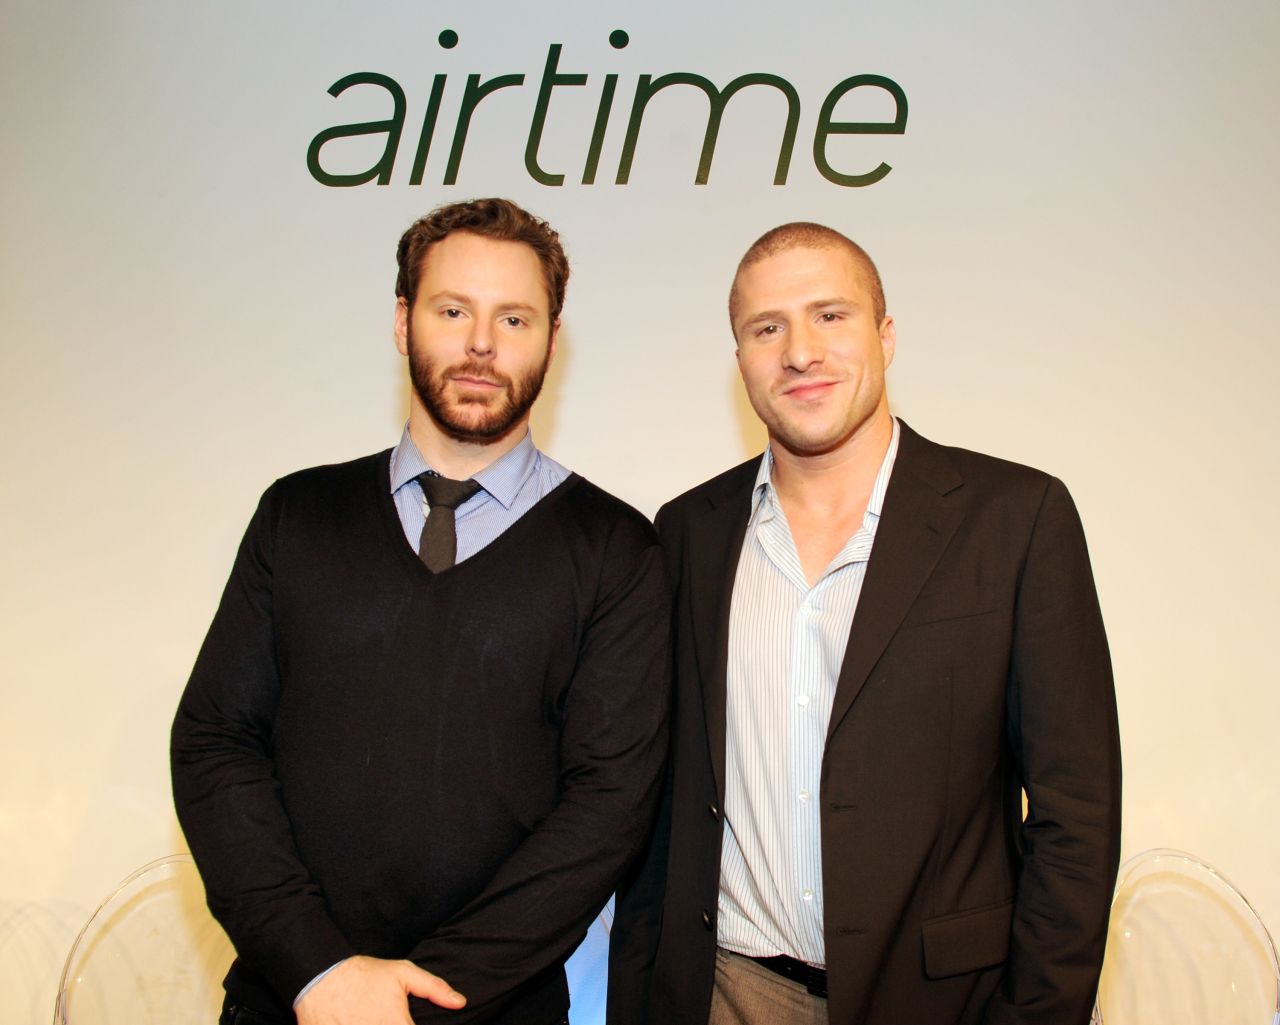 Airtime, a video-chat service created by tech hotshots Sean Parker, left, and Shawn Fanning, launched with a glitzy party in June. Four months later, it had just 10,000 active users.